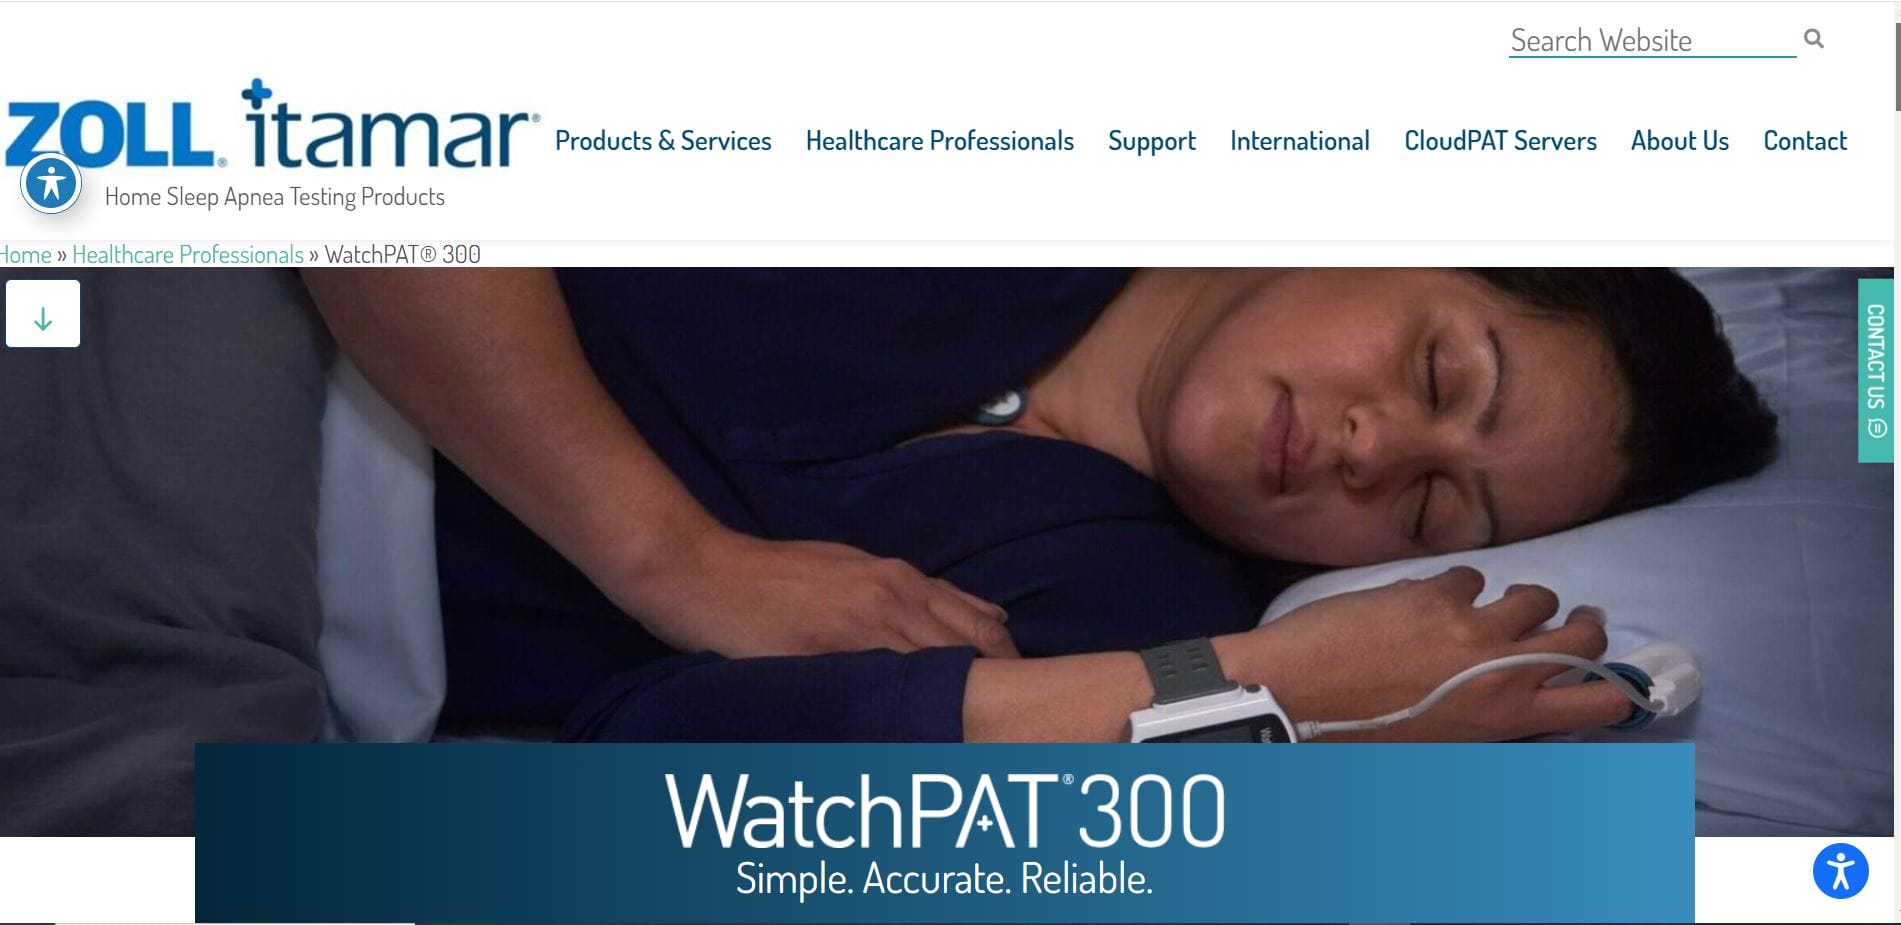 A woman sleeping in bed while wearing a WatchPAT 300 device on her wrist, with promotional text overlay for the sleep testing product including a pricing guide.